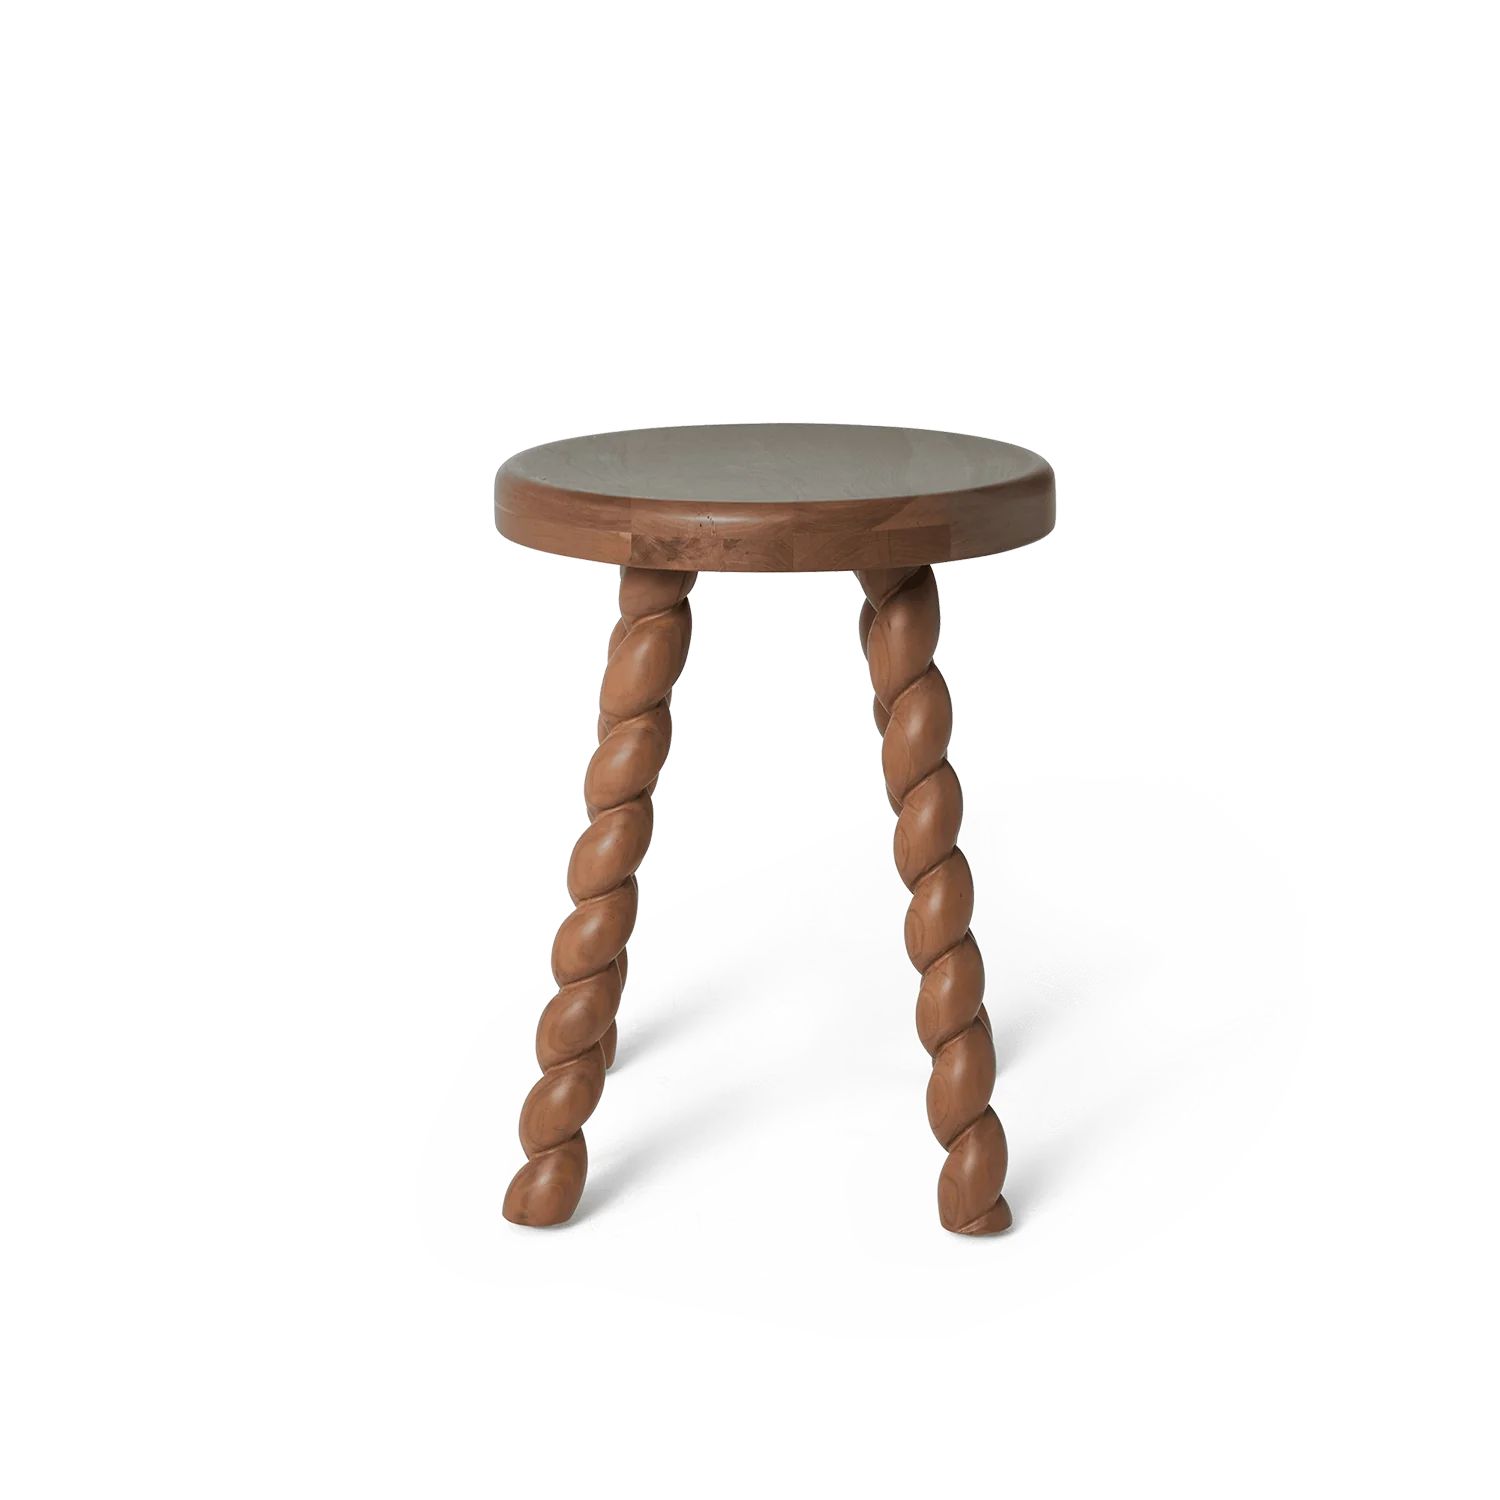 Twist side table - brown cherry with hand shaped spiral legs | Hati Home